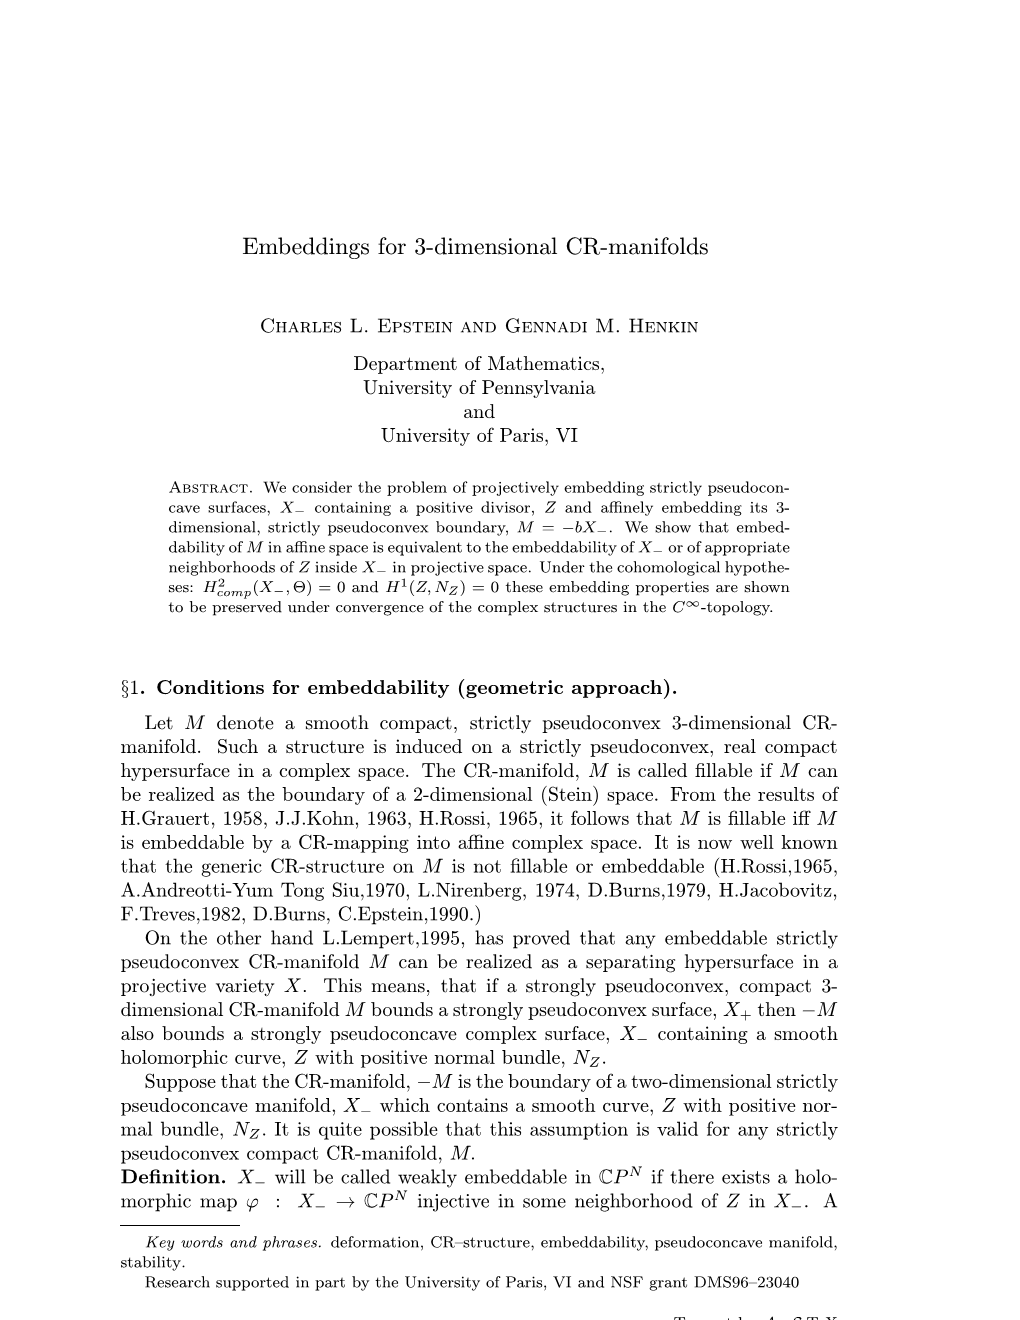 Embeddings for 3-Dimensional CR-Manifolds